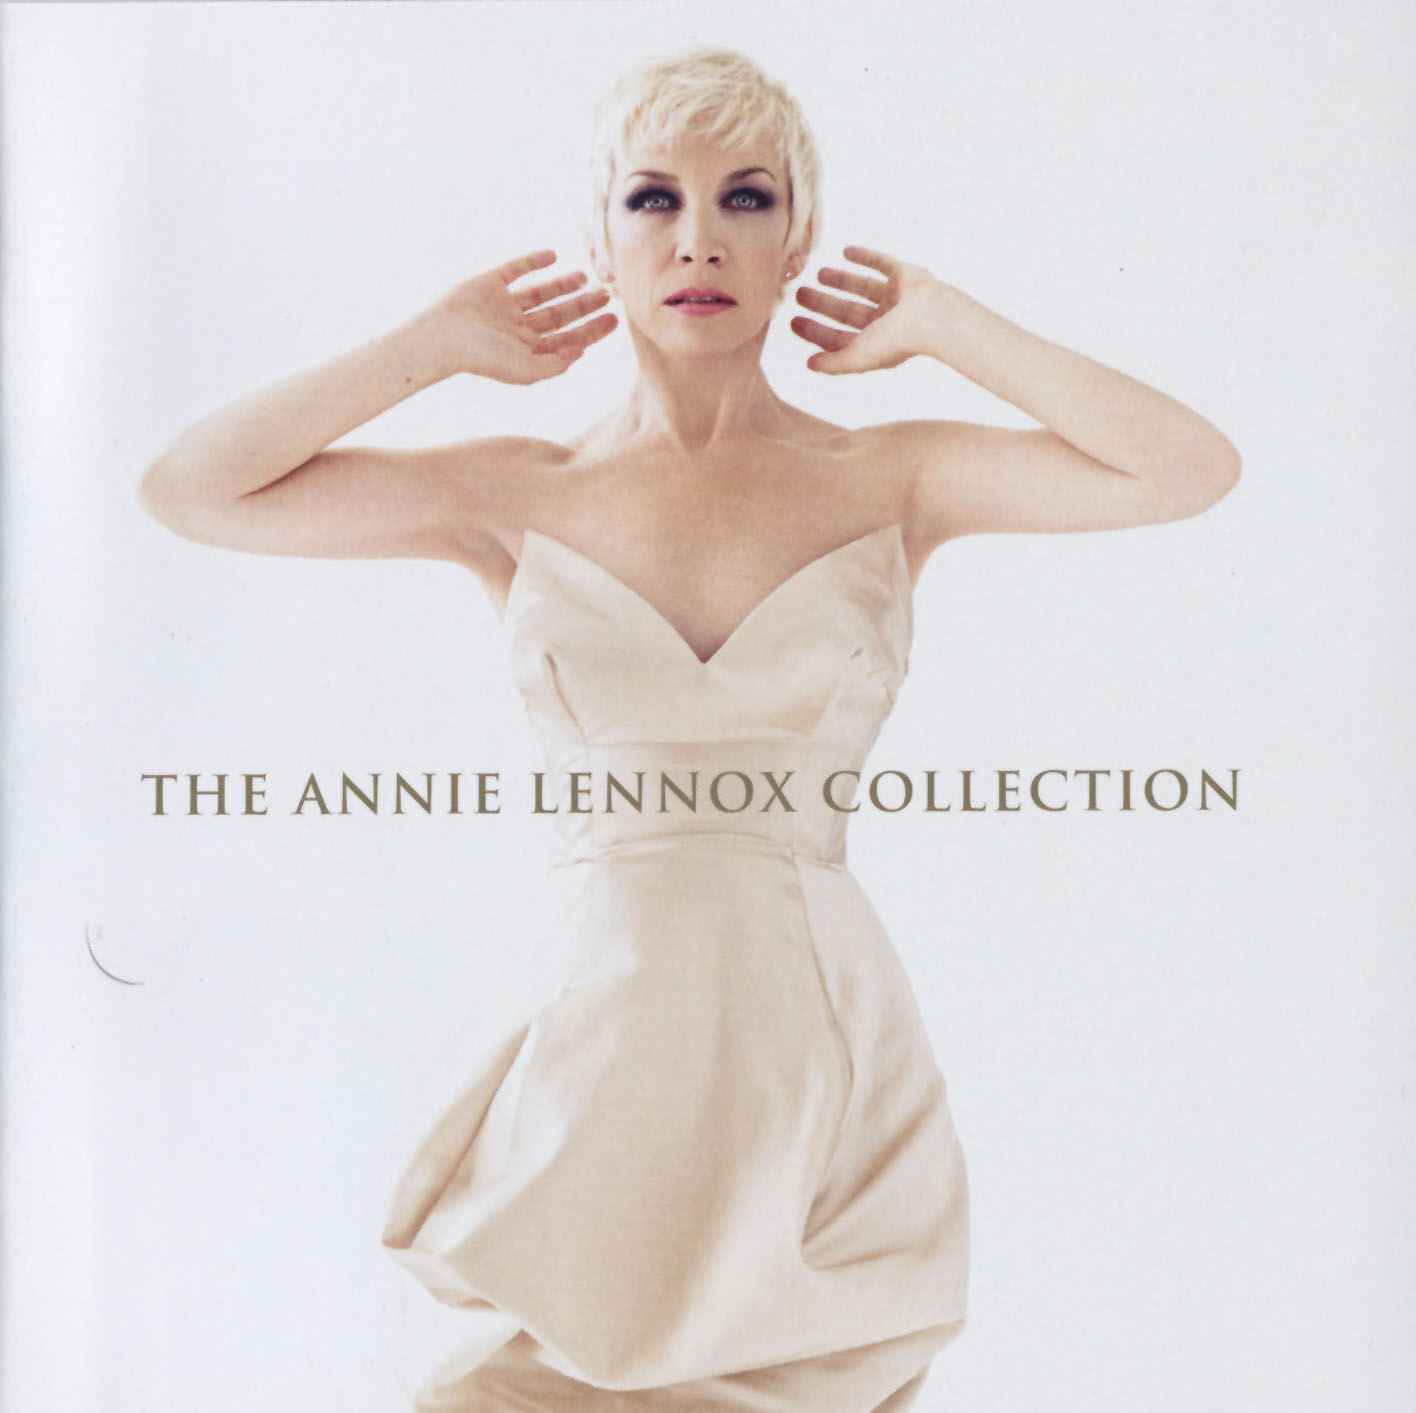 The Annie Lennox Collection